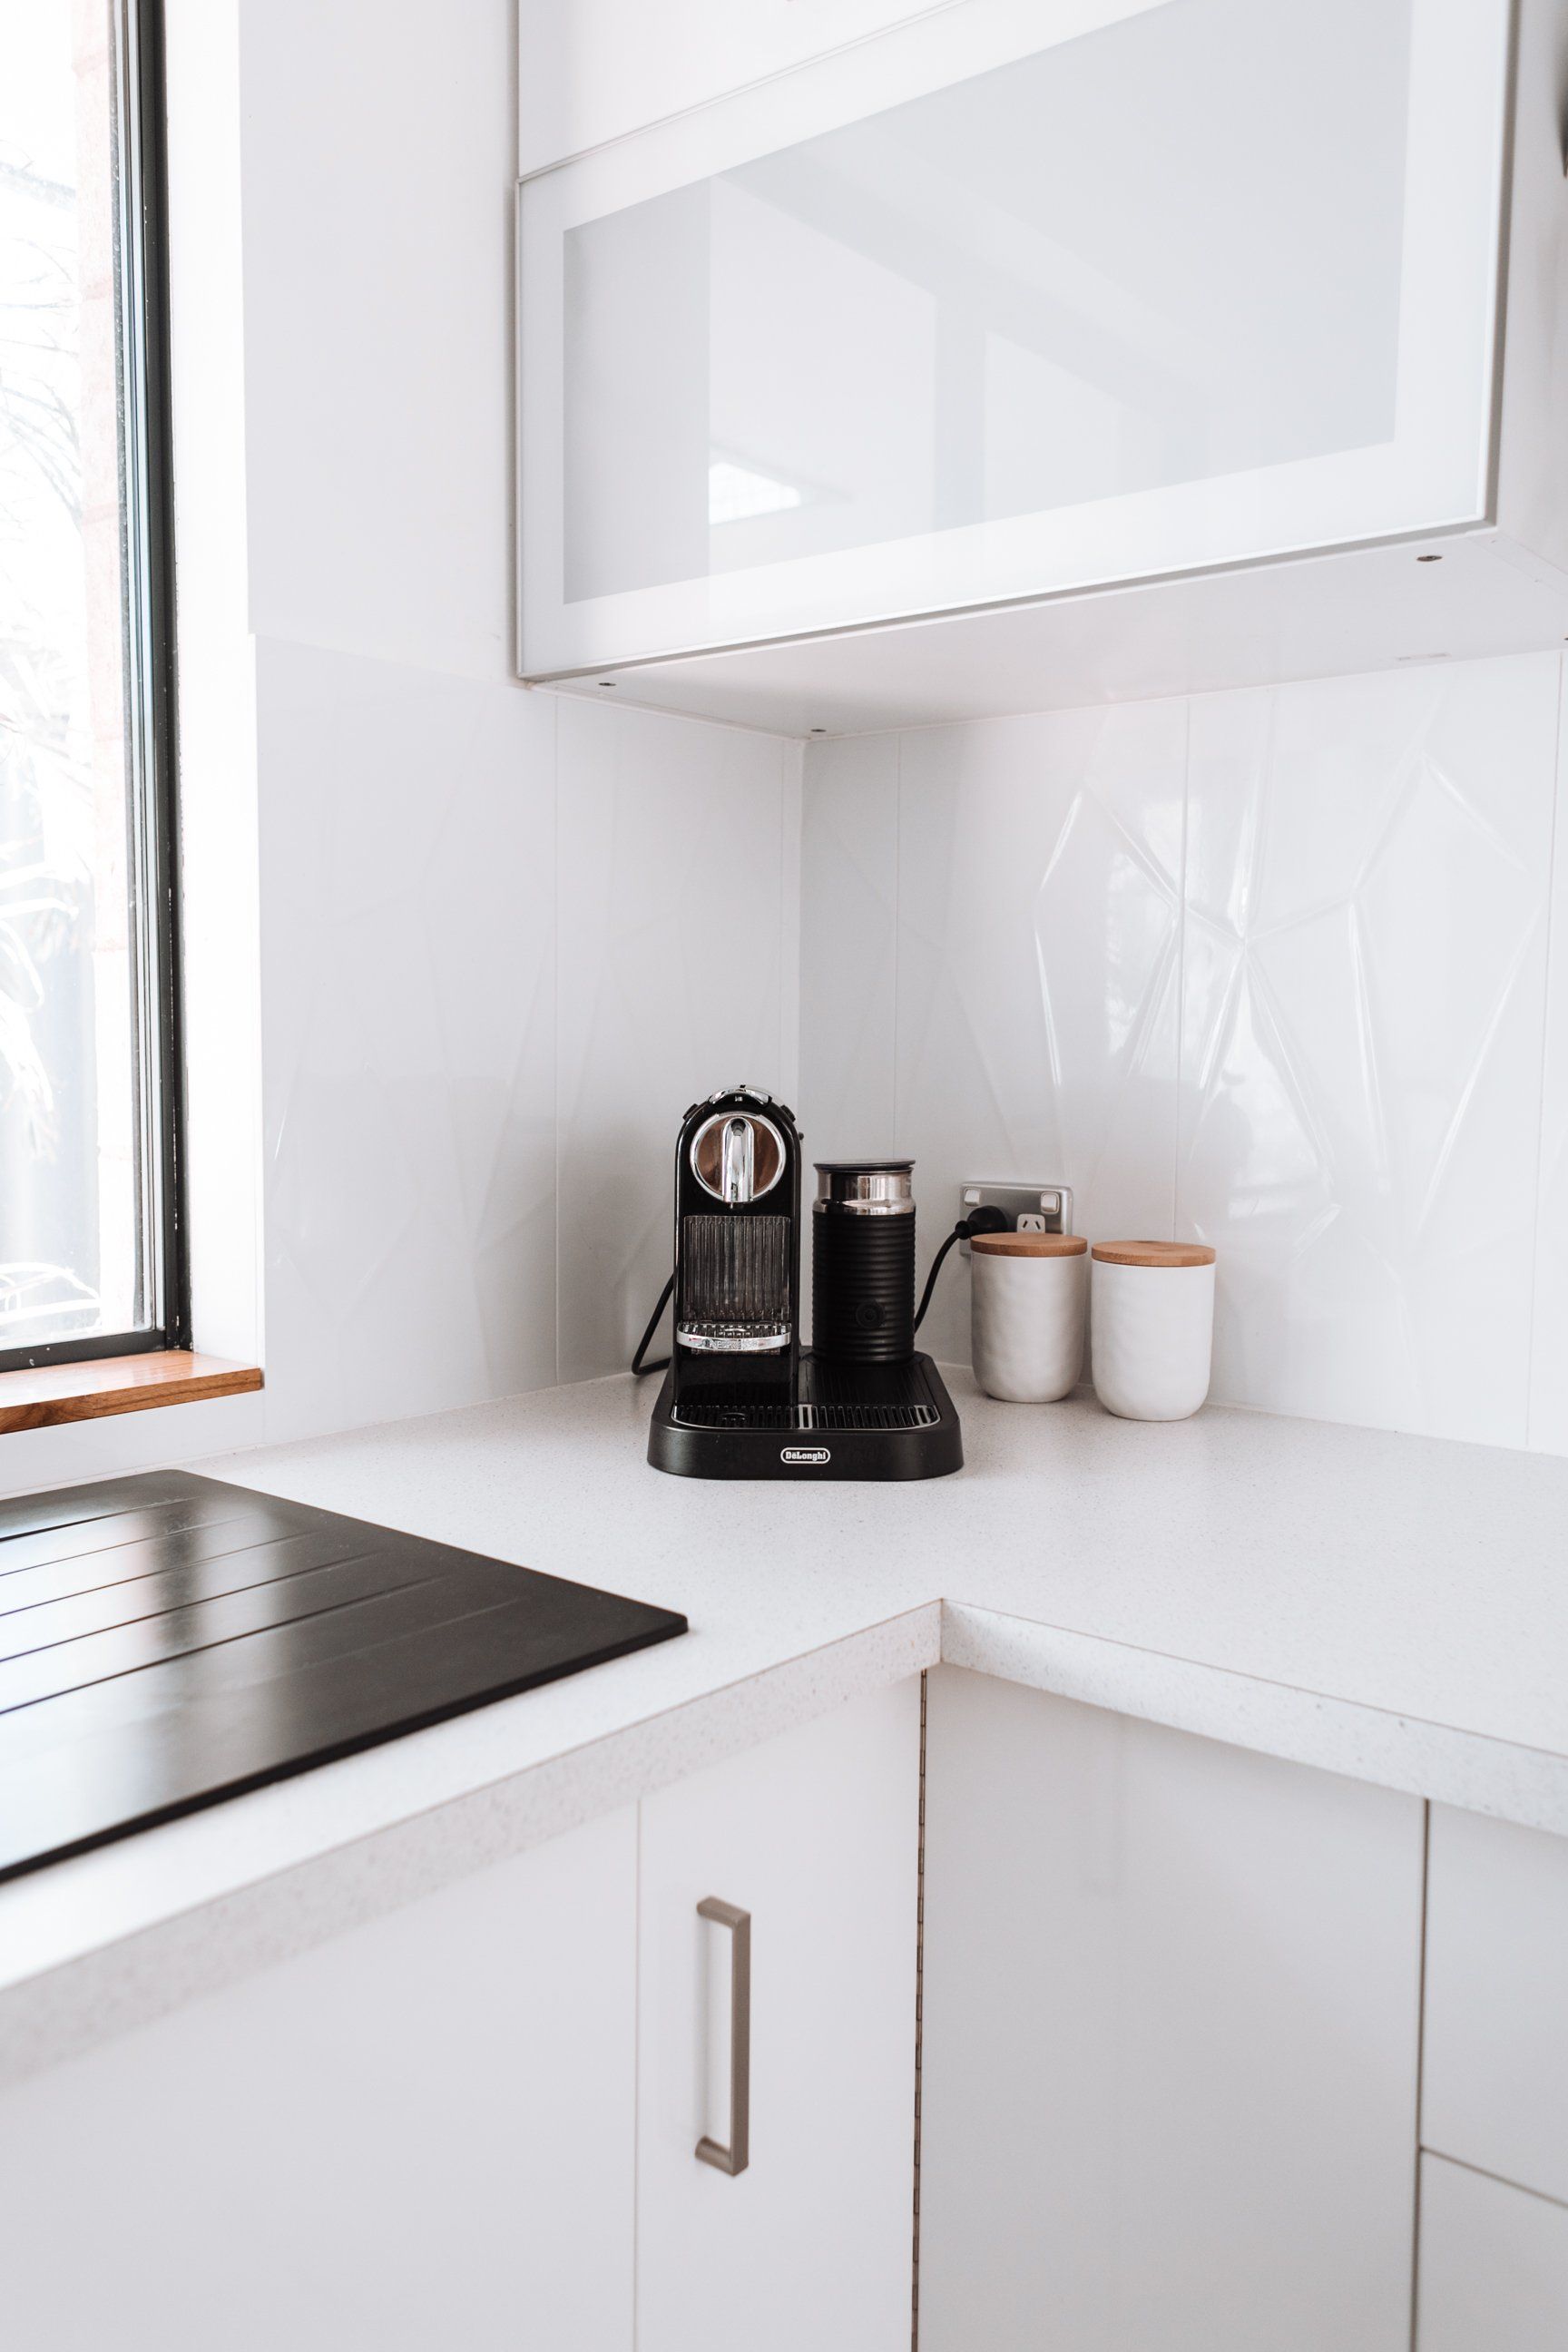 a kitchen with white cabinets and a coffee maker on the counter:  Turn Your Crowded Kitchen Into A Minimalist Space